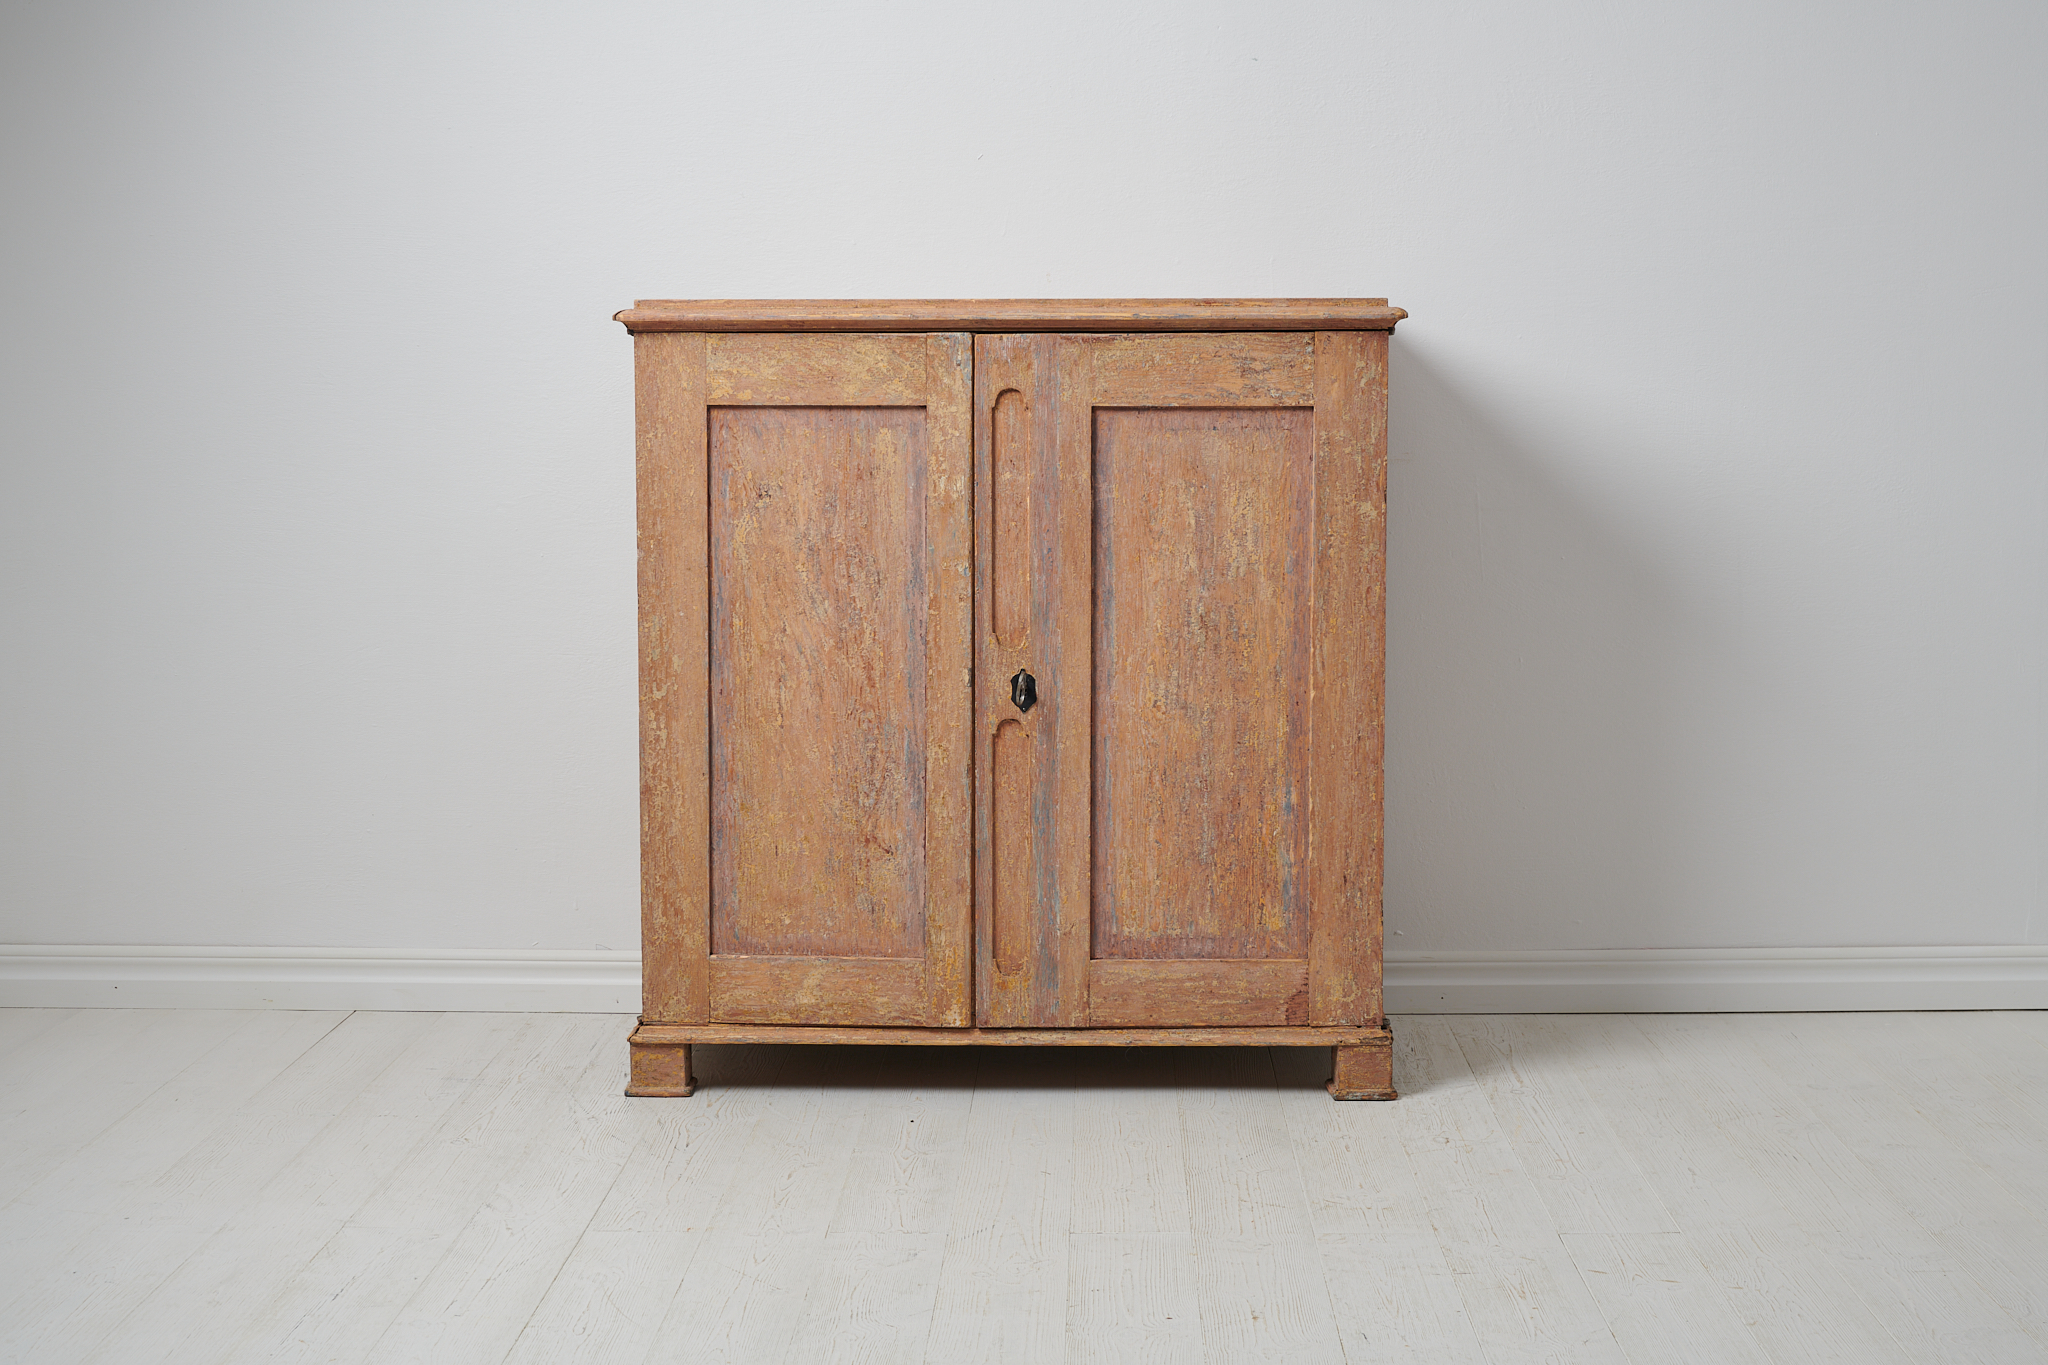 Antique Swedish country sideboard from around 1830. The sideboard is an authentic Swedish country furniture made in painted pine.